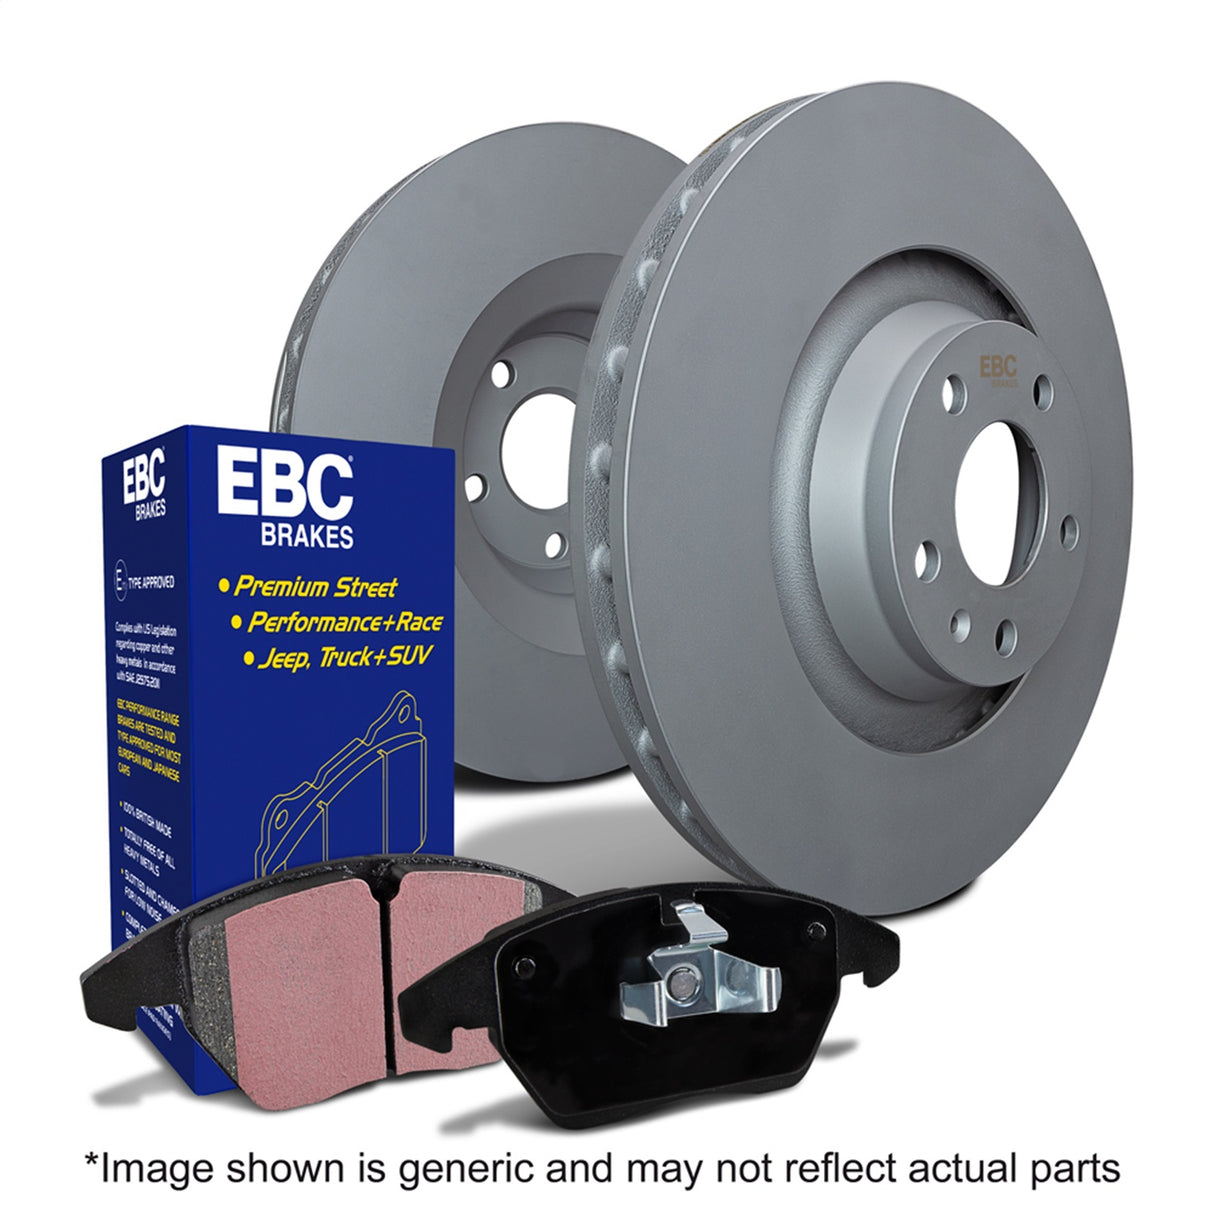 EBC Brakes S20K1285 S20 Kits Ultimax and Plain Rotors - Roam Overland Outfitters